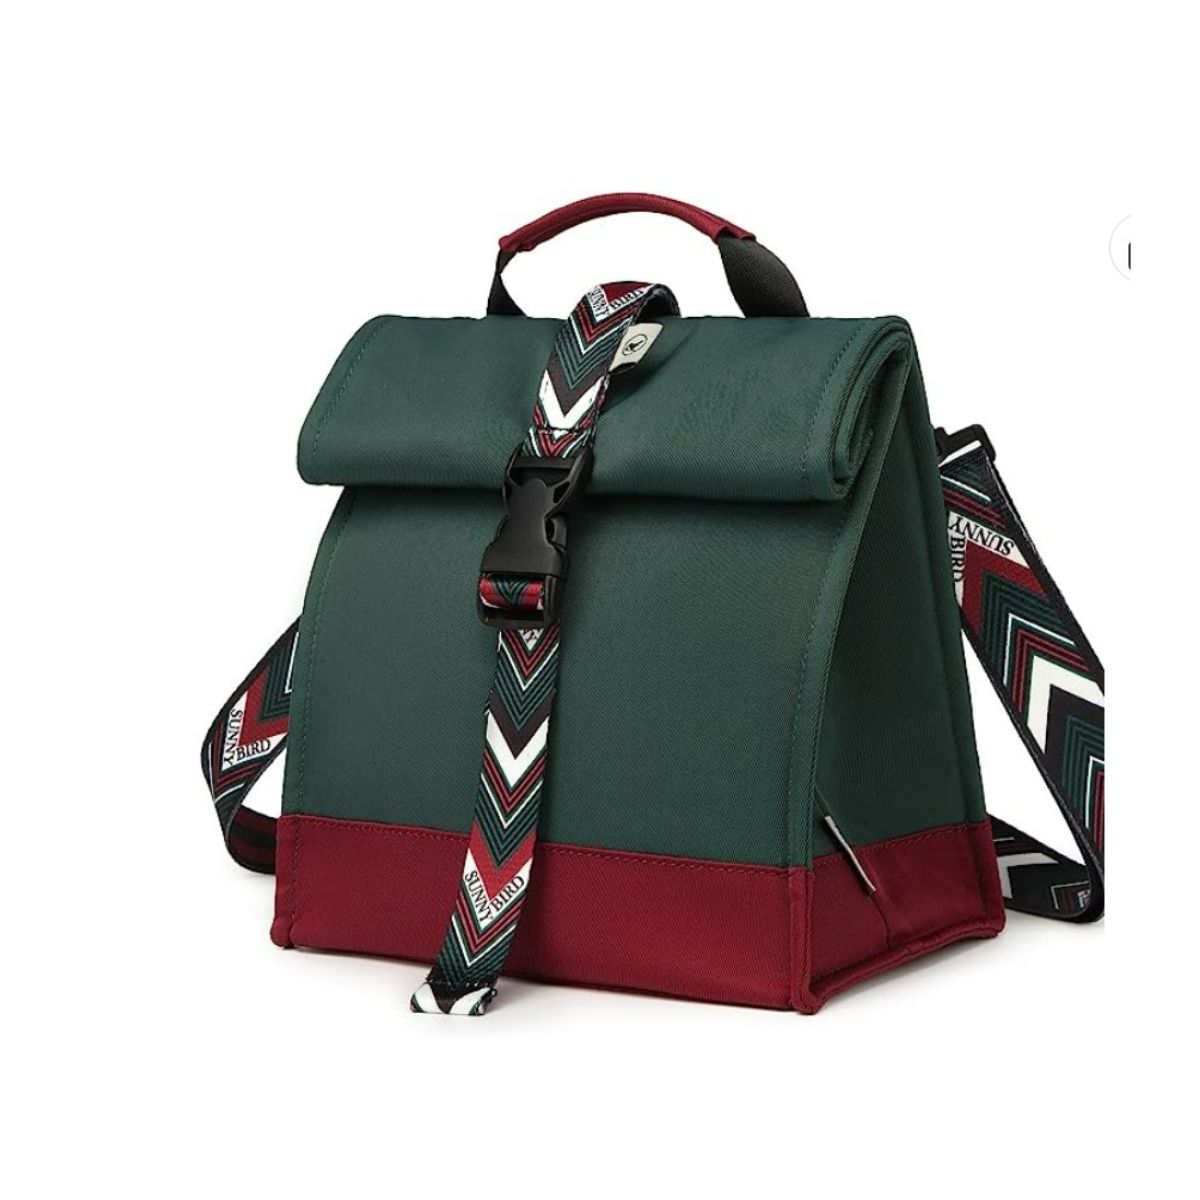 Red and green insulated lunch box with roll-top and tie-looking patterned straps